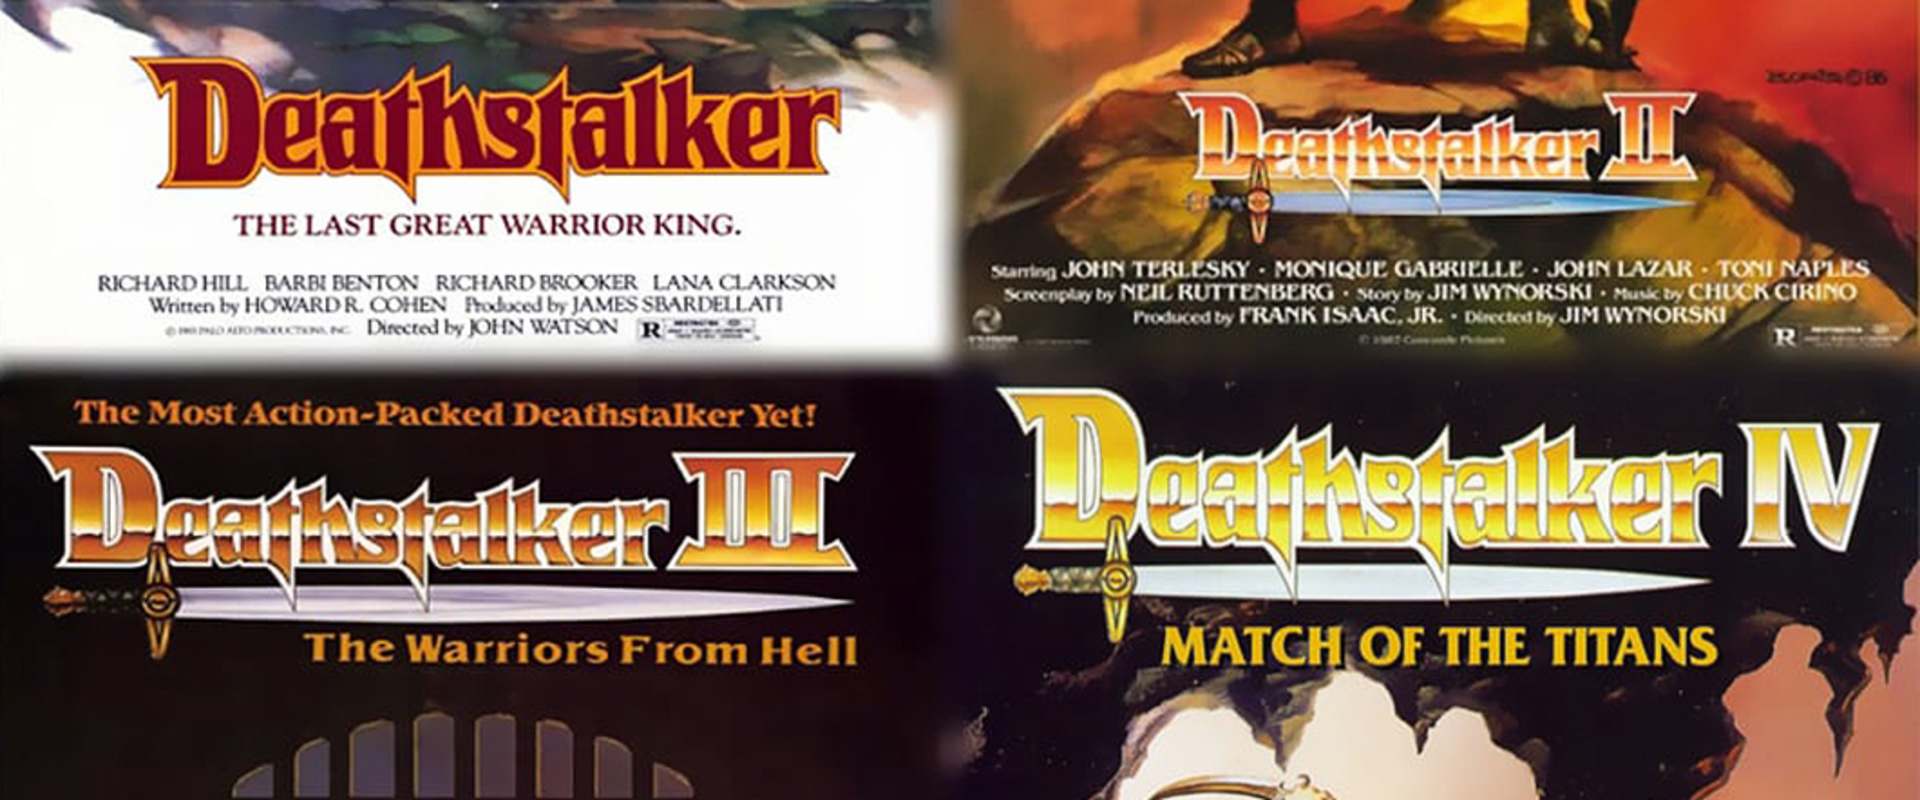 Deathstalker and the Warriors from Hell background 1